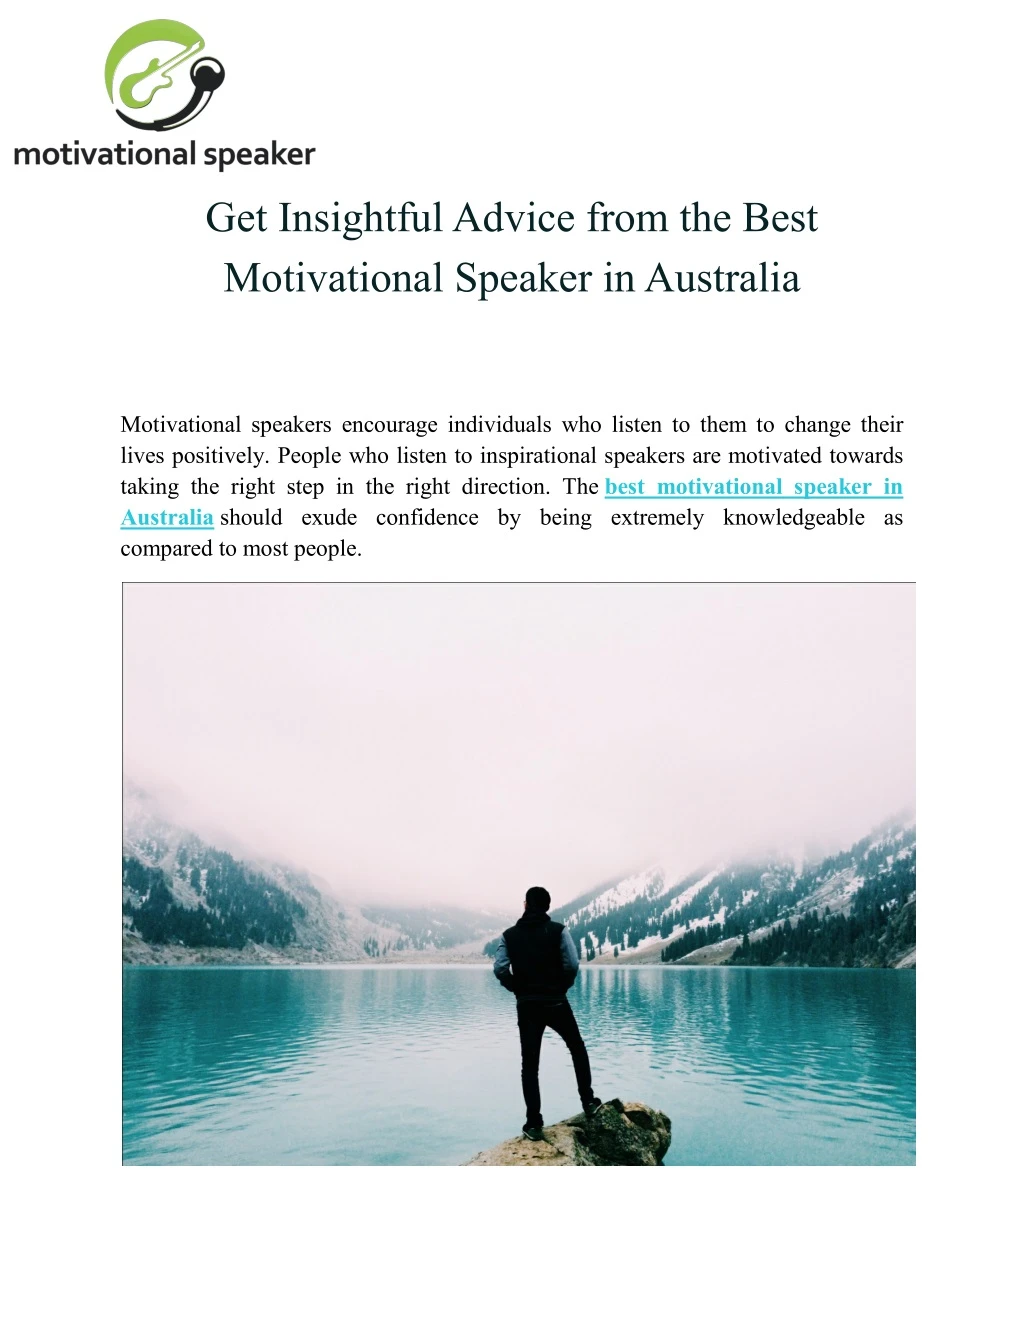 get insightful advice from the best motivational